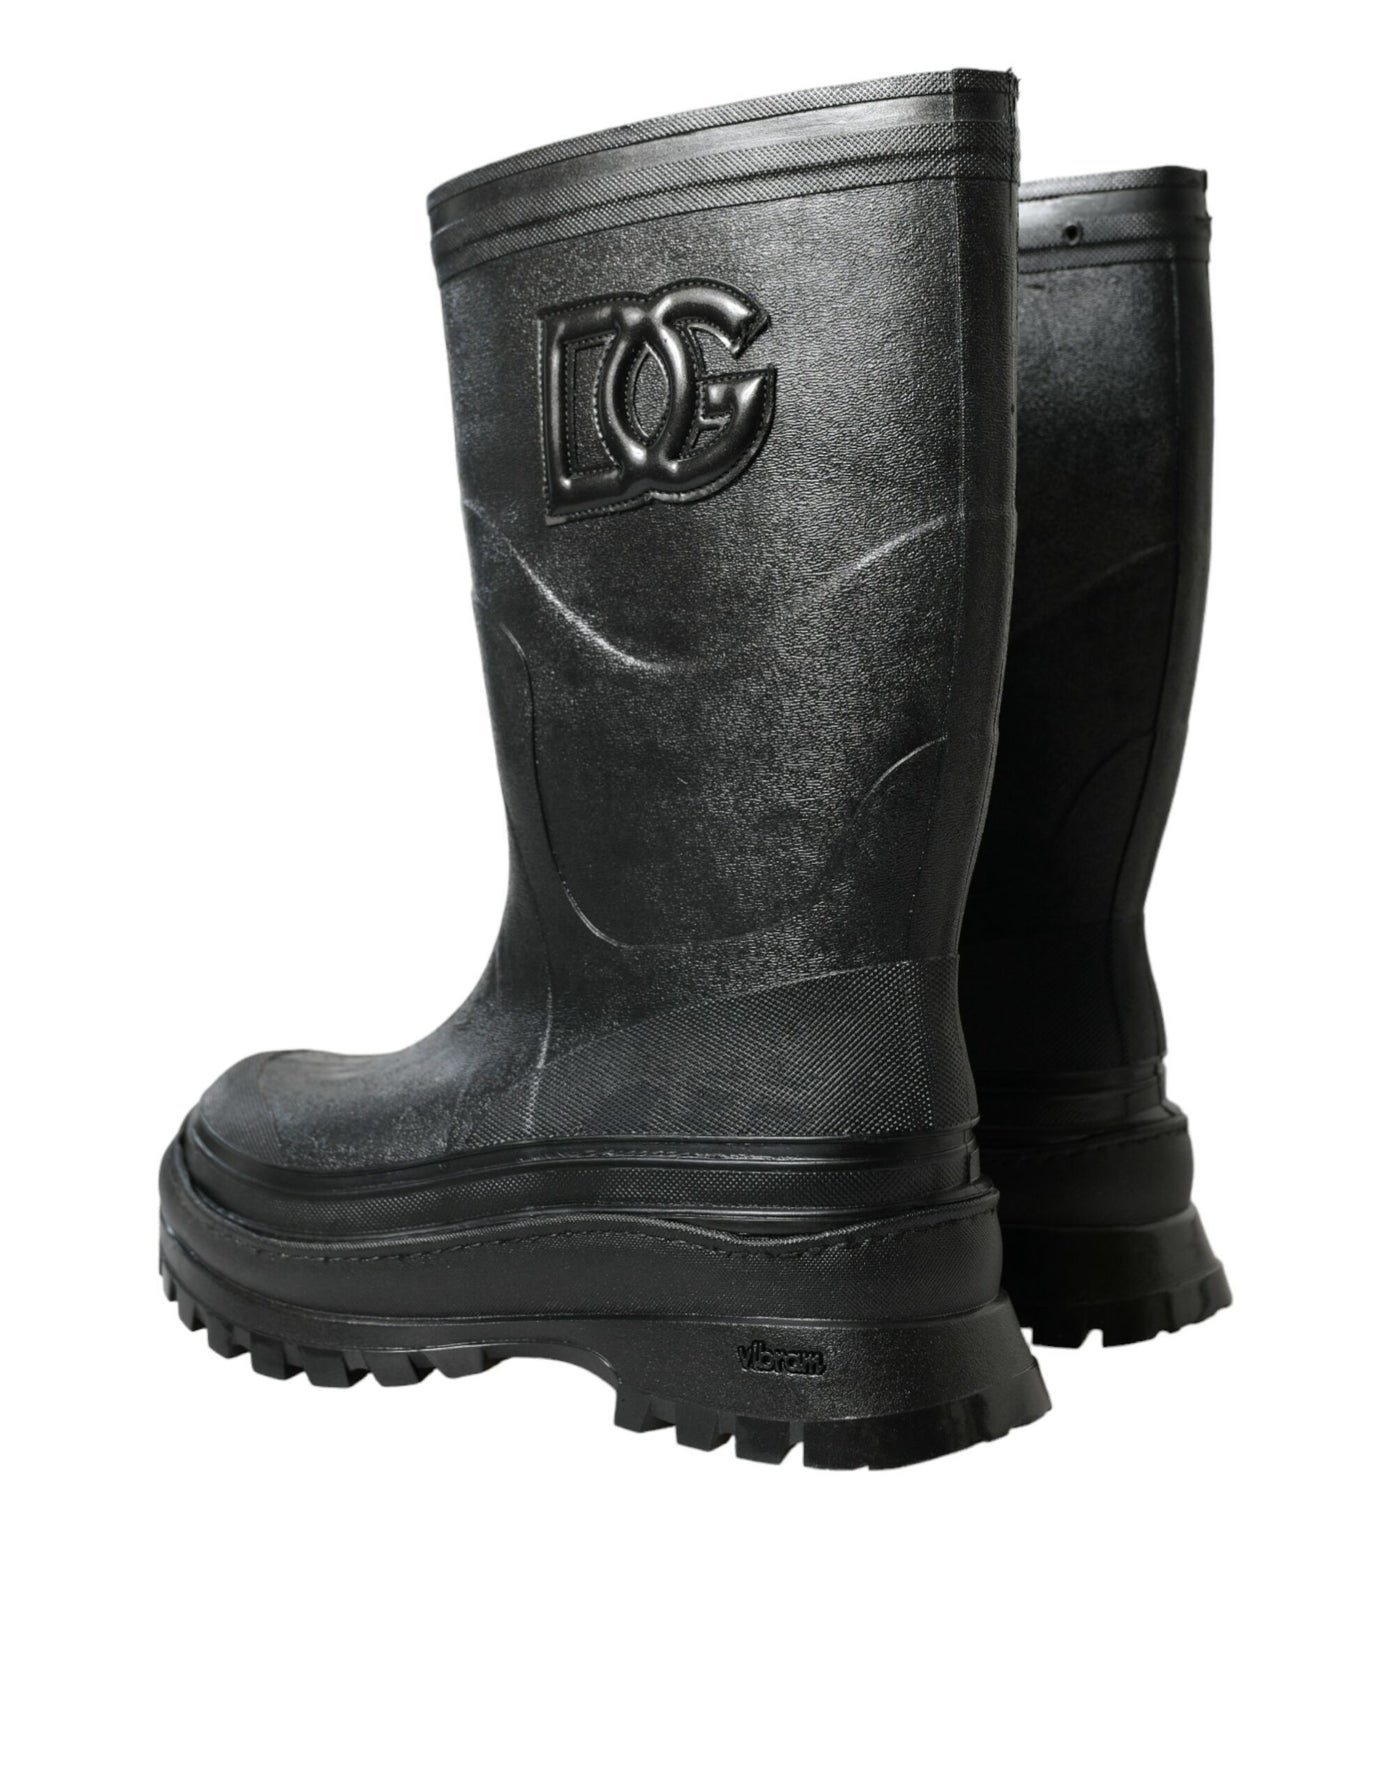 Dolce & Gabbana Black Embossed Metallic Rubber Boots Shoes